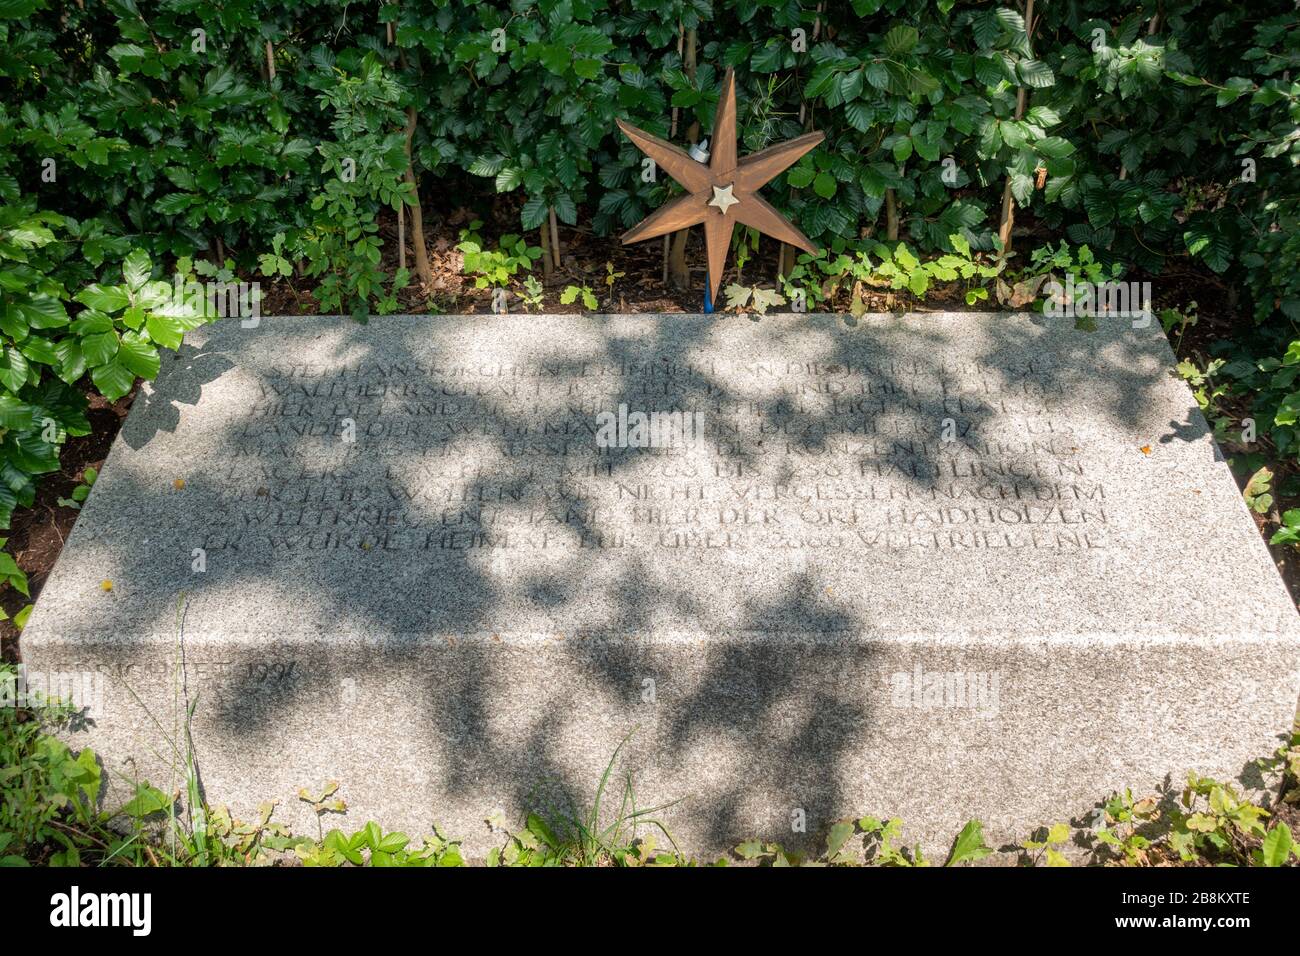 The KZ Gedenkstätte (concentration camp memorial) for the WWII Haidholzen Camp in Stephanskirchen, Germany Stock Photo